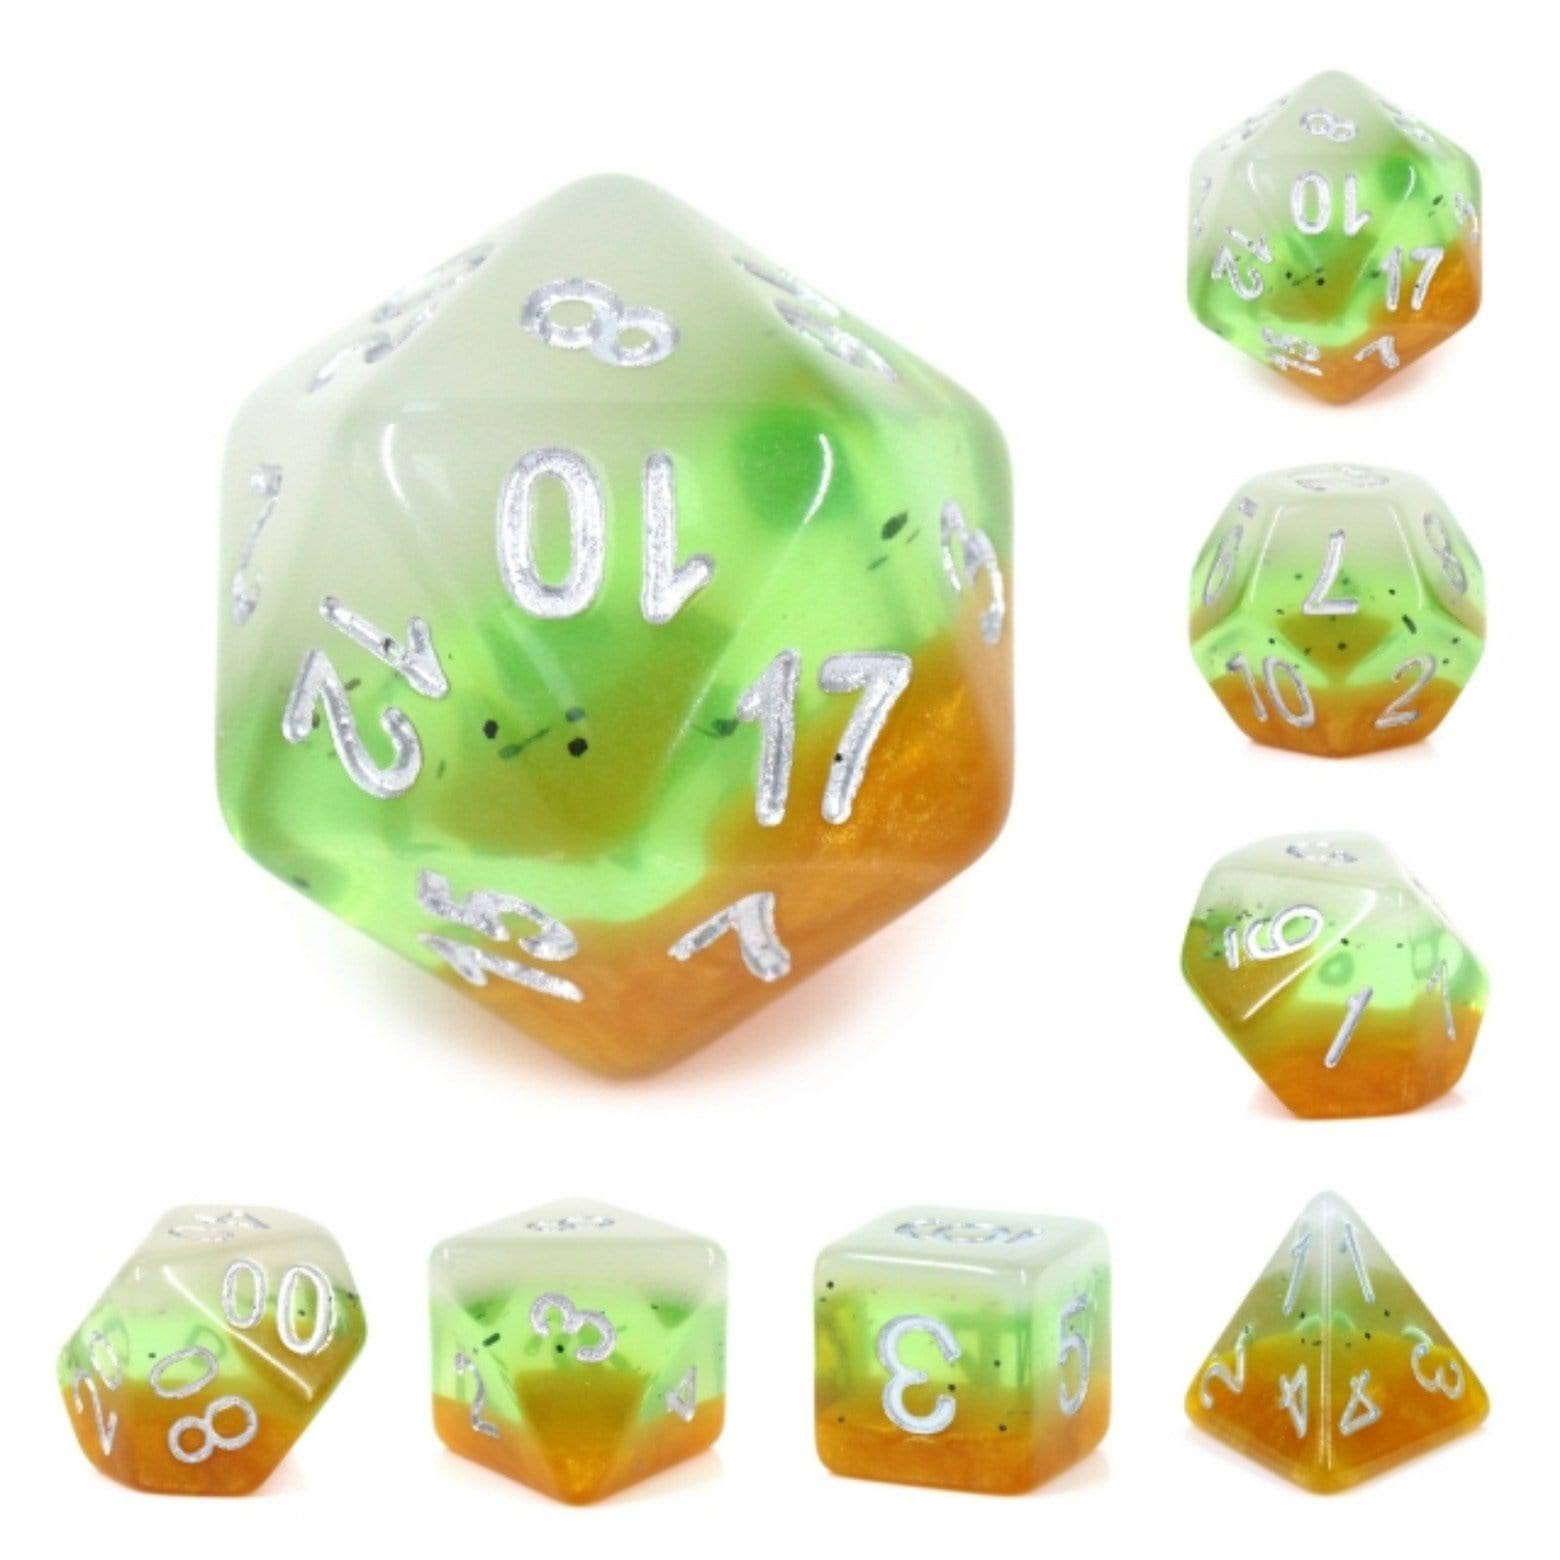 Dice and Gaming Accessories Polyhedral RPG Sets Yellow and Green Kiwi Fruit (7)